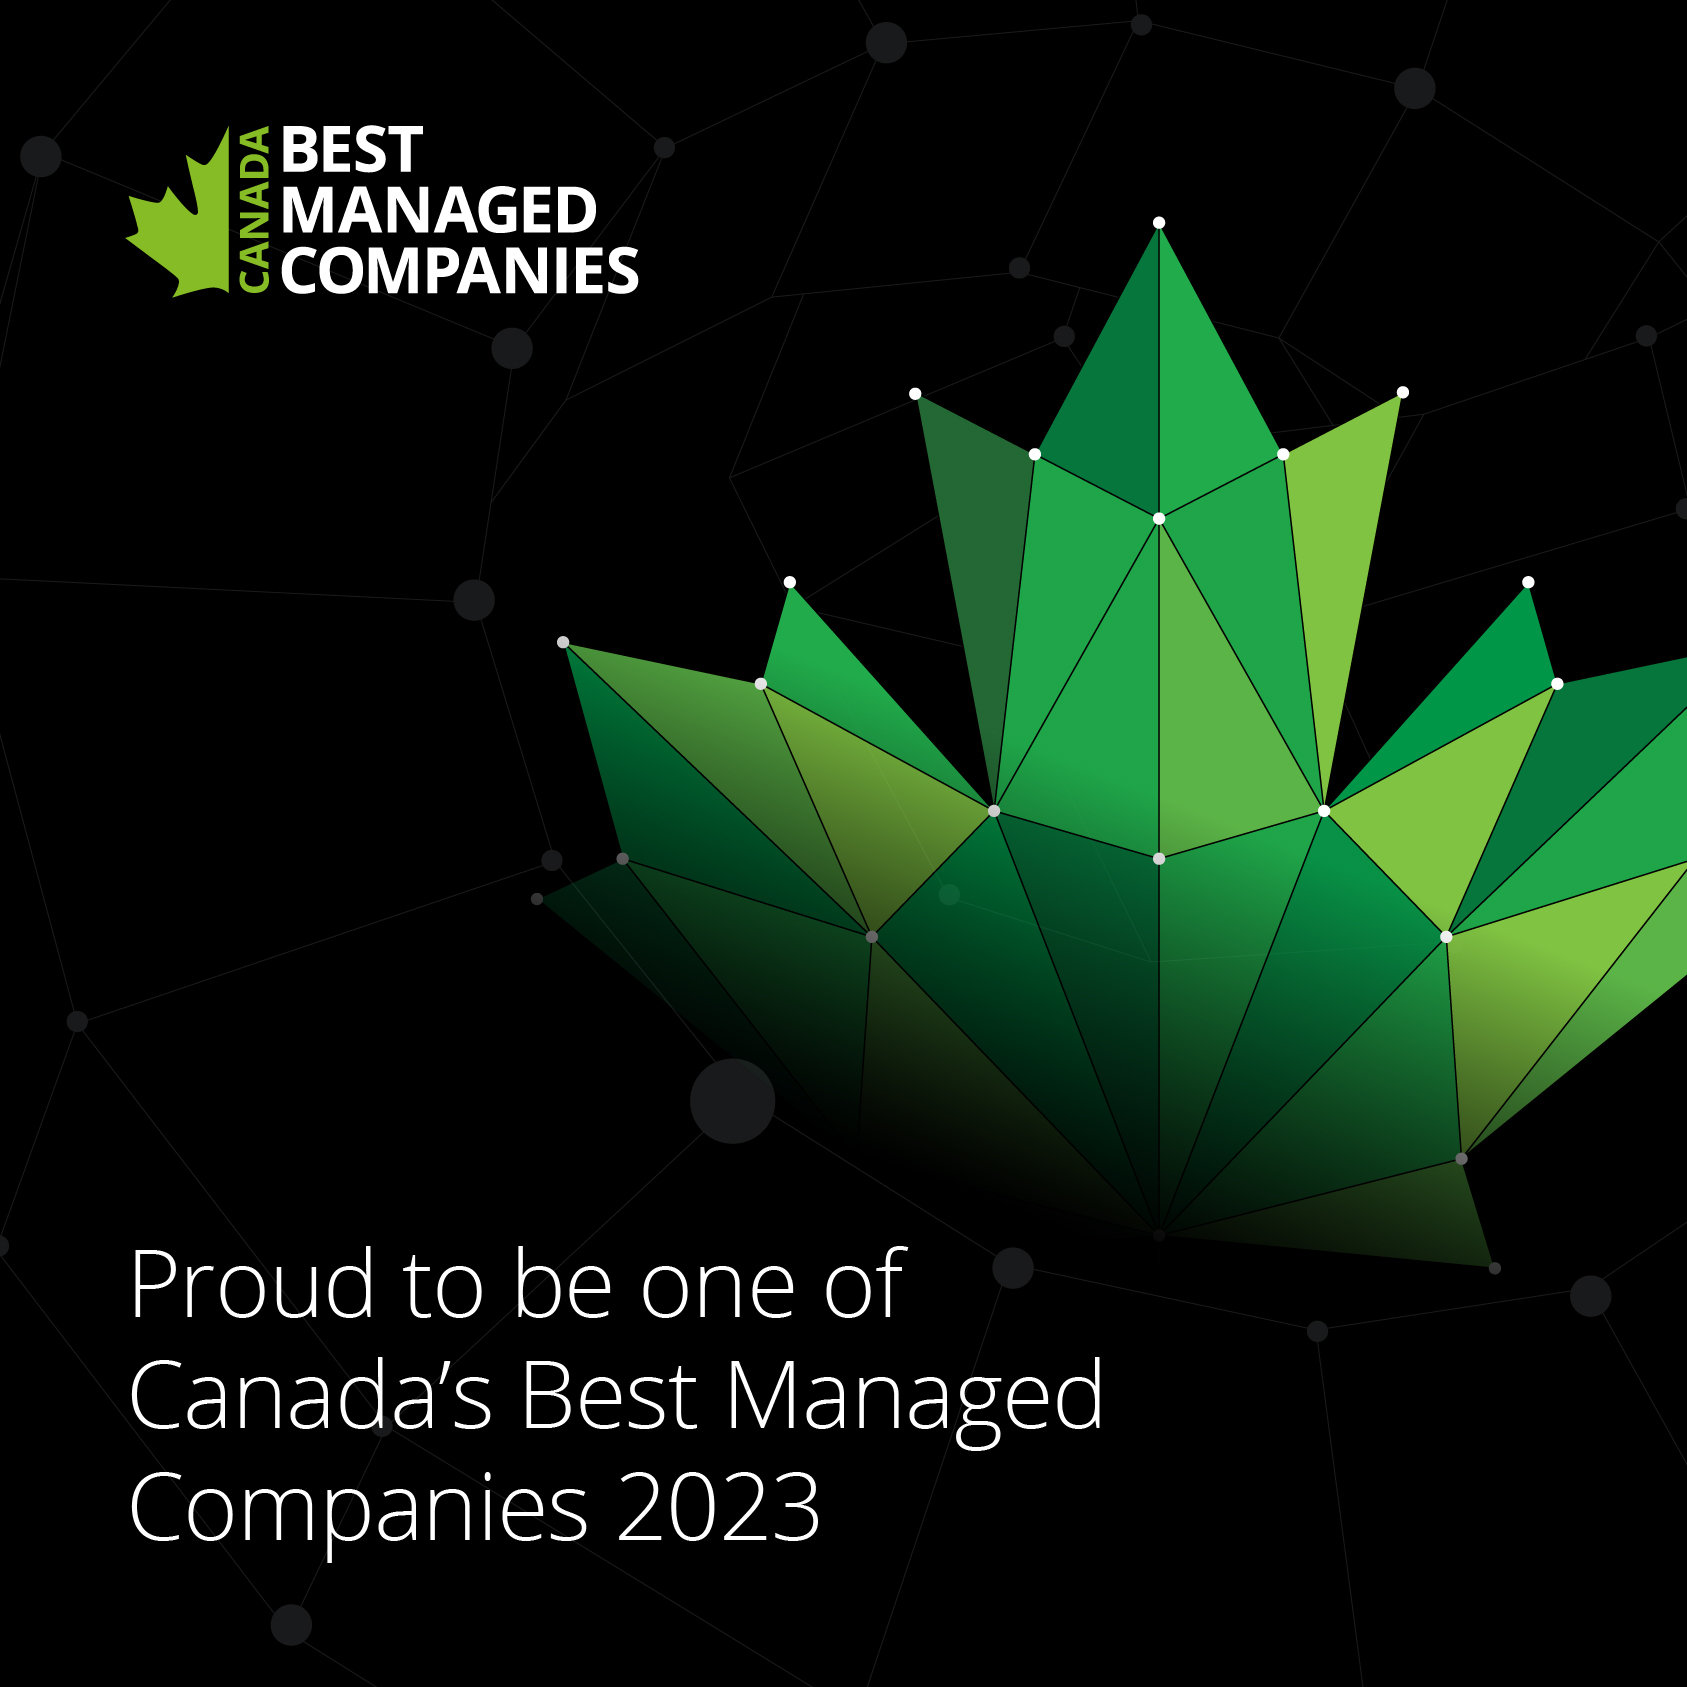 Best Managed Companies logo on black background with green maple leaf to the right and the words "For a second year in a row, Inflector Environmental Services is proud to be one of Canada's Best Managed Companies 2023."